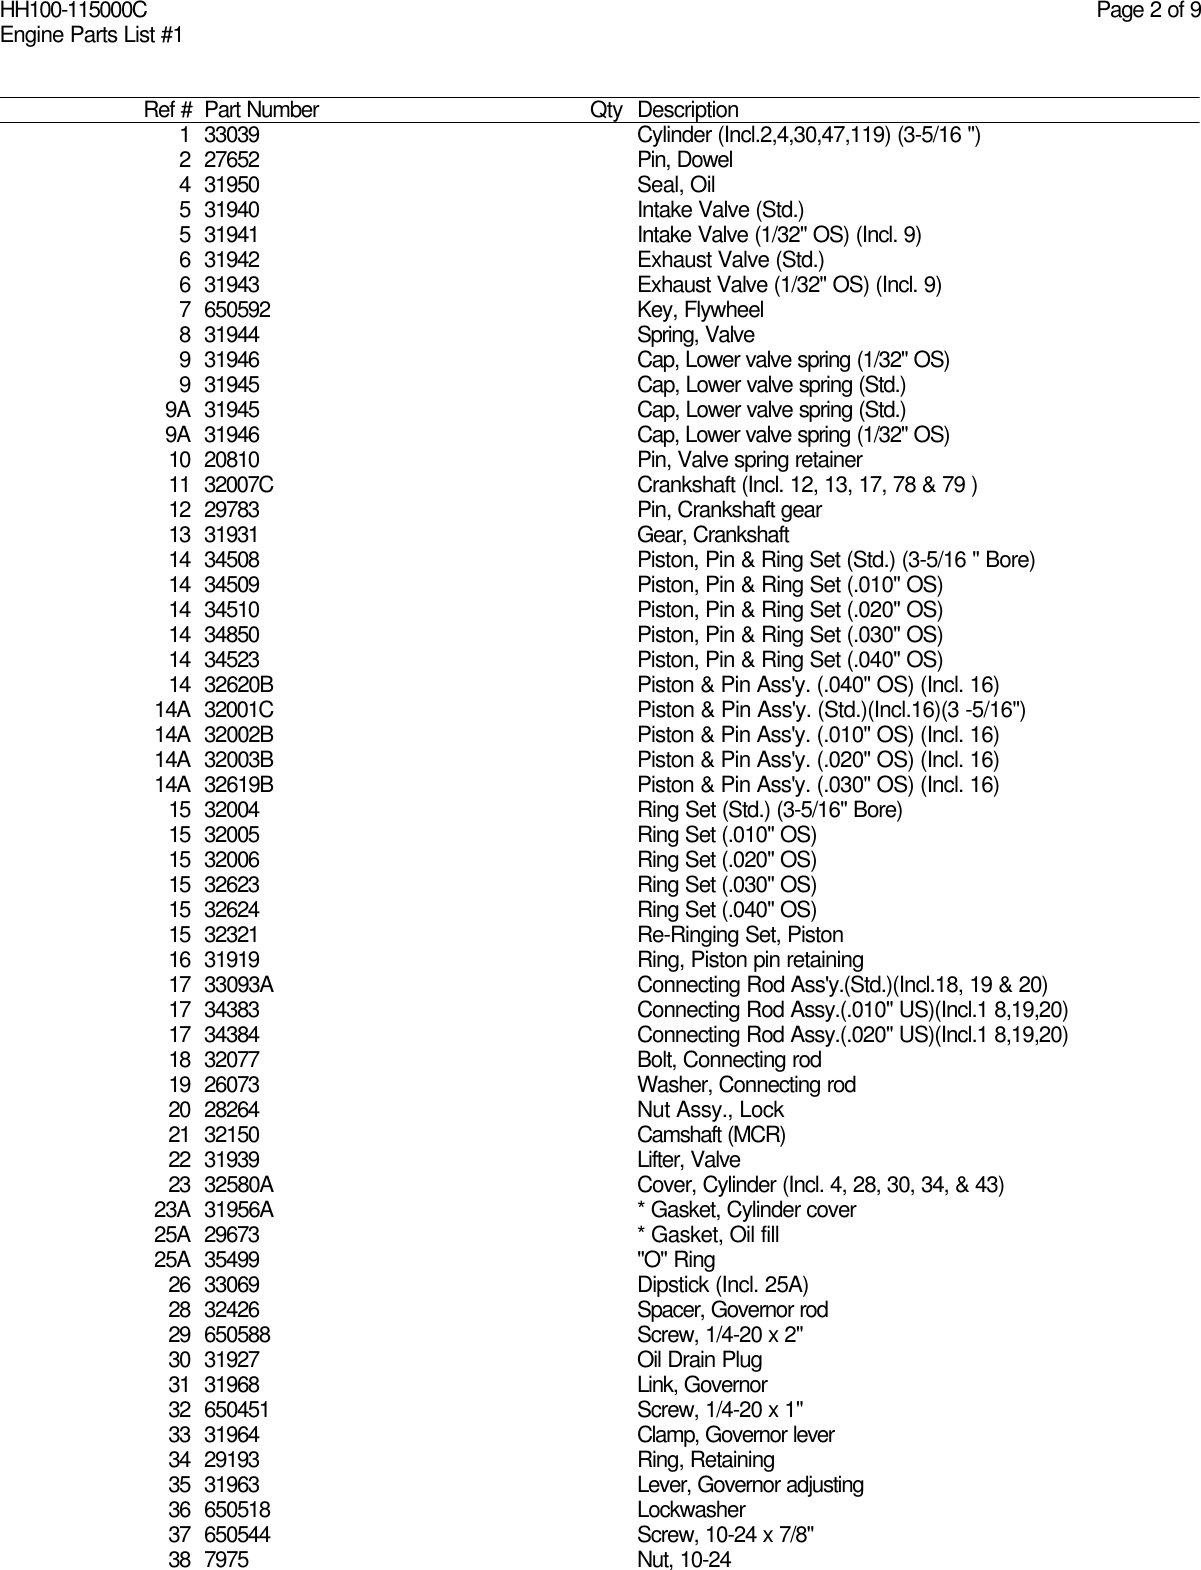 Page 2 of 9 - Diagram And/or PartsList Tecumseh HH100-115000C Parts List